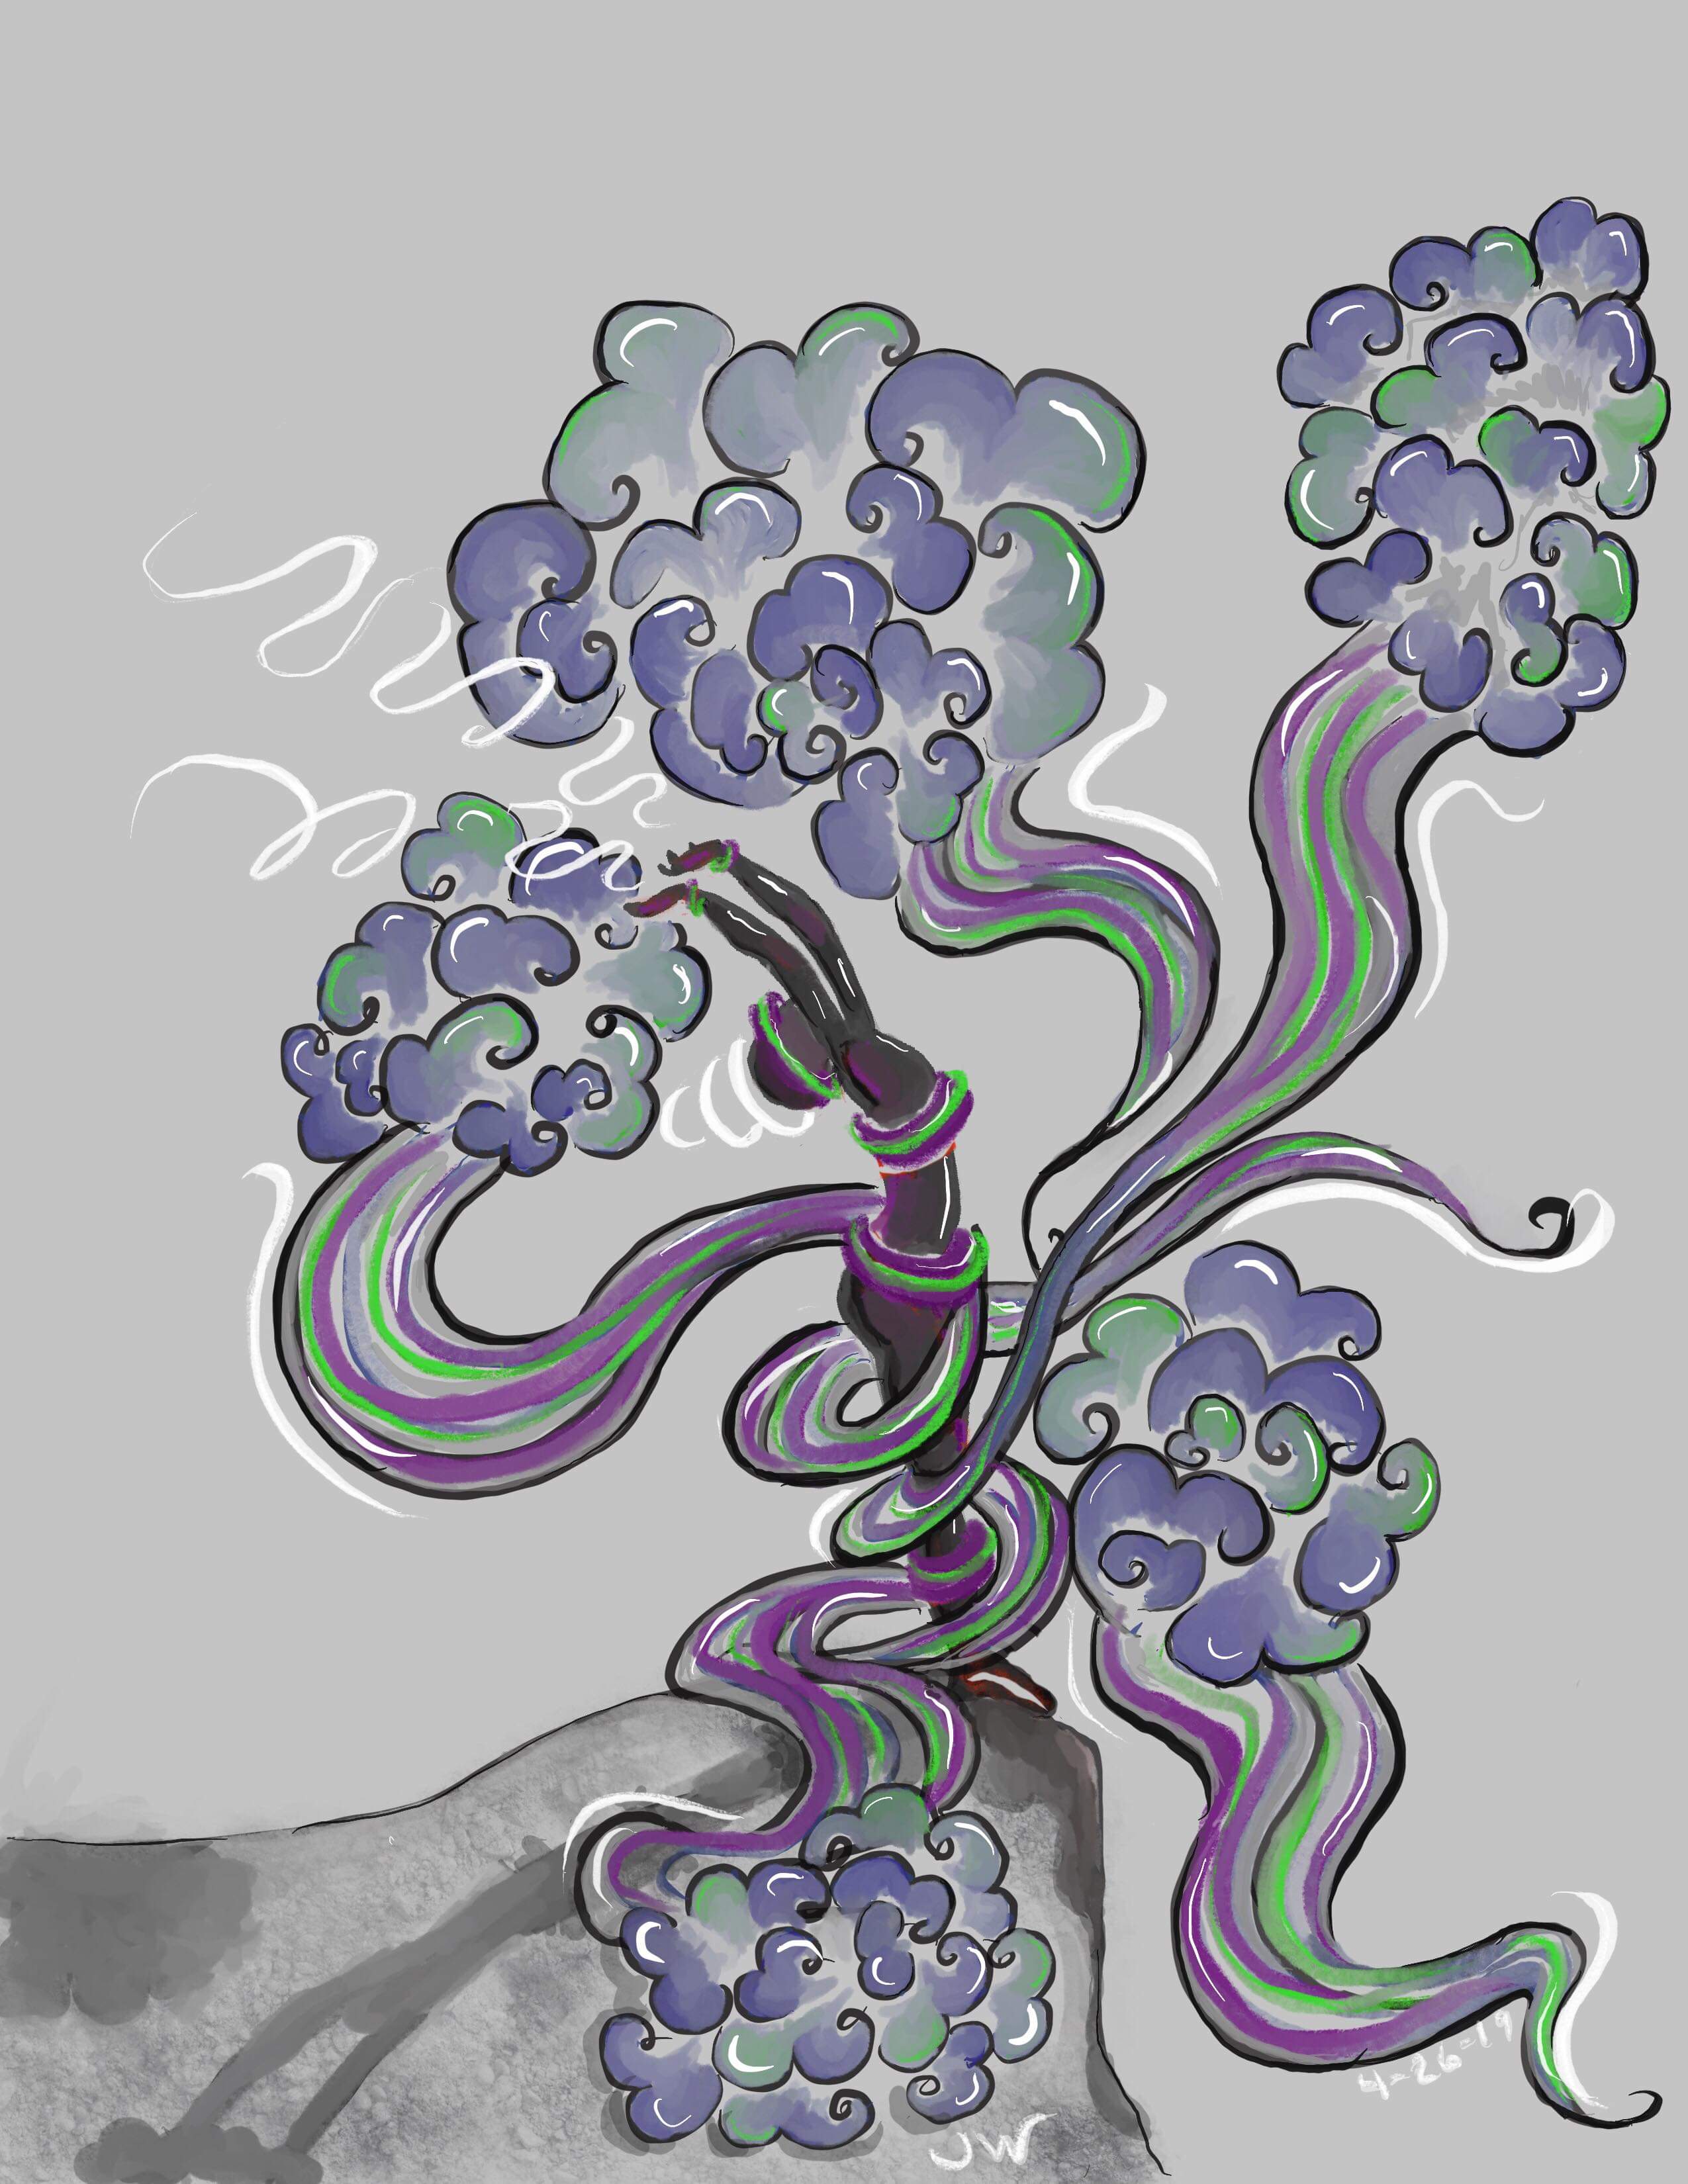 image of a person standing on the edge of a cliff with purple and grey clouds swirling around their body, coming off of them and around the cliff